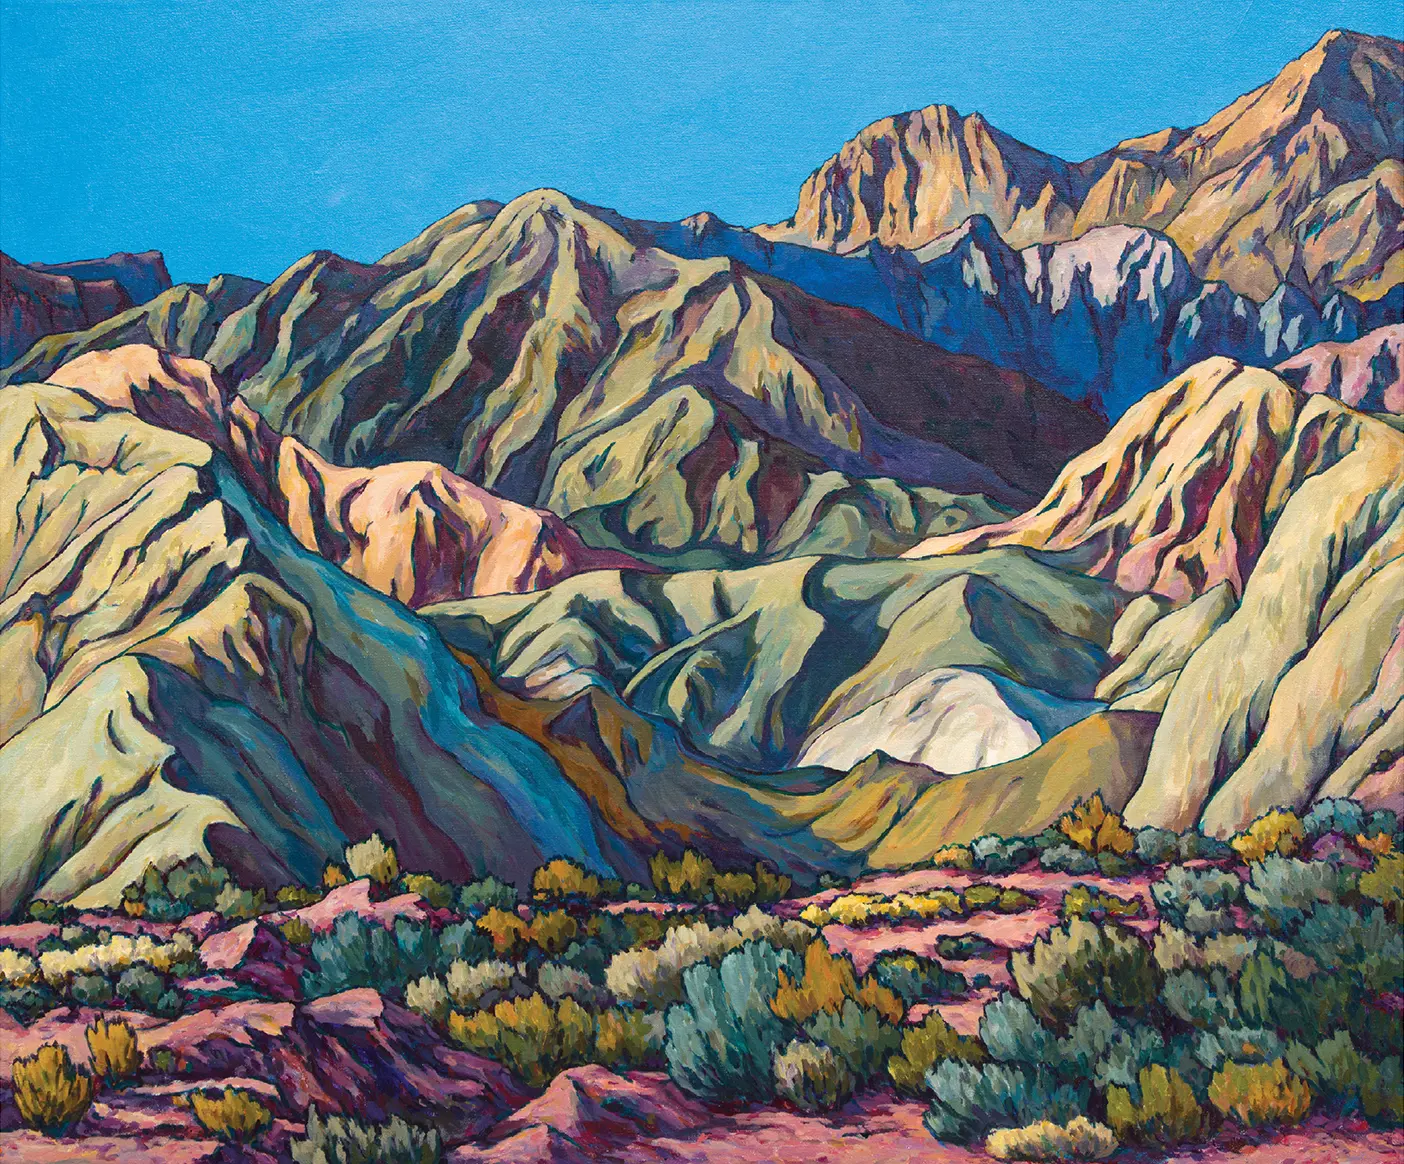 A painting of mountains